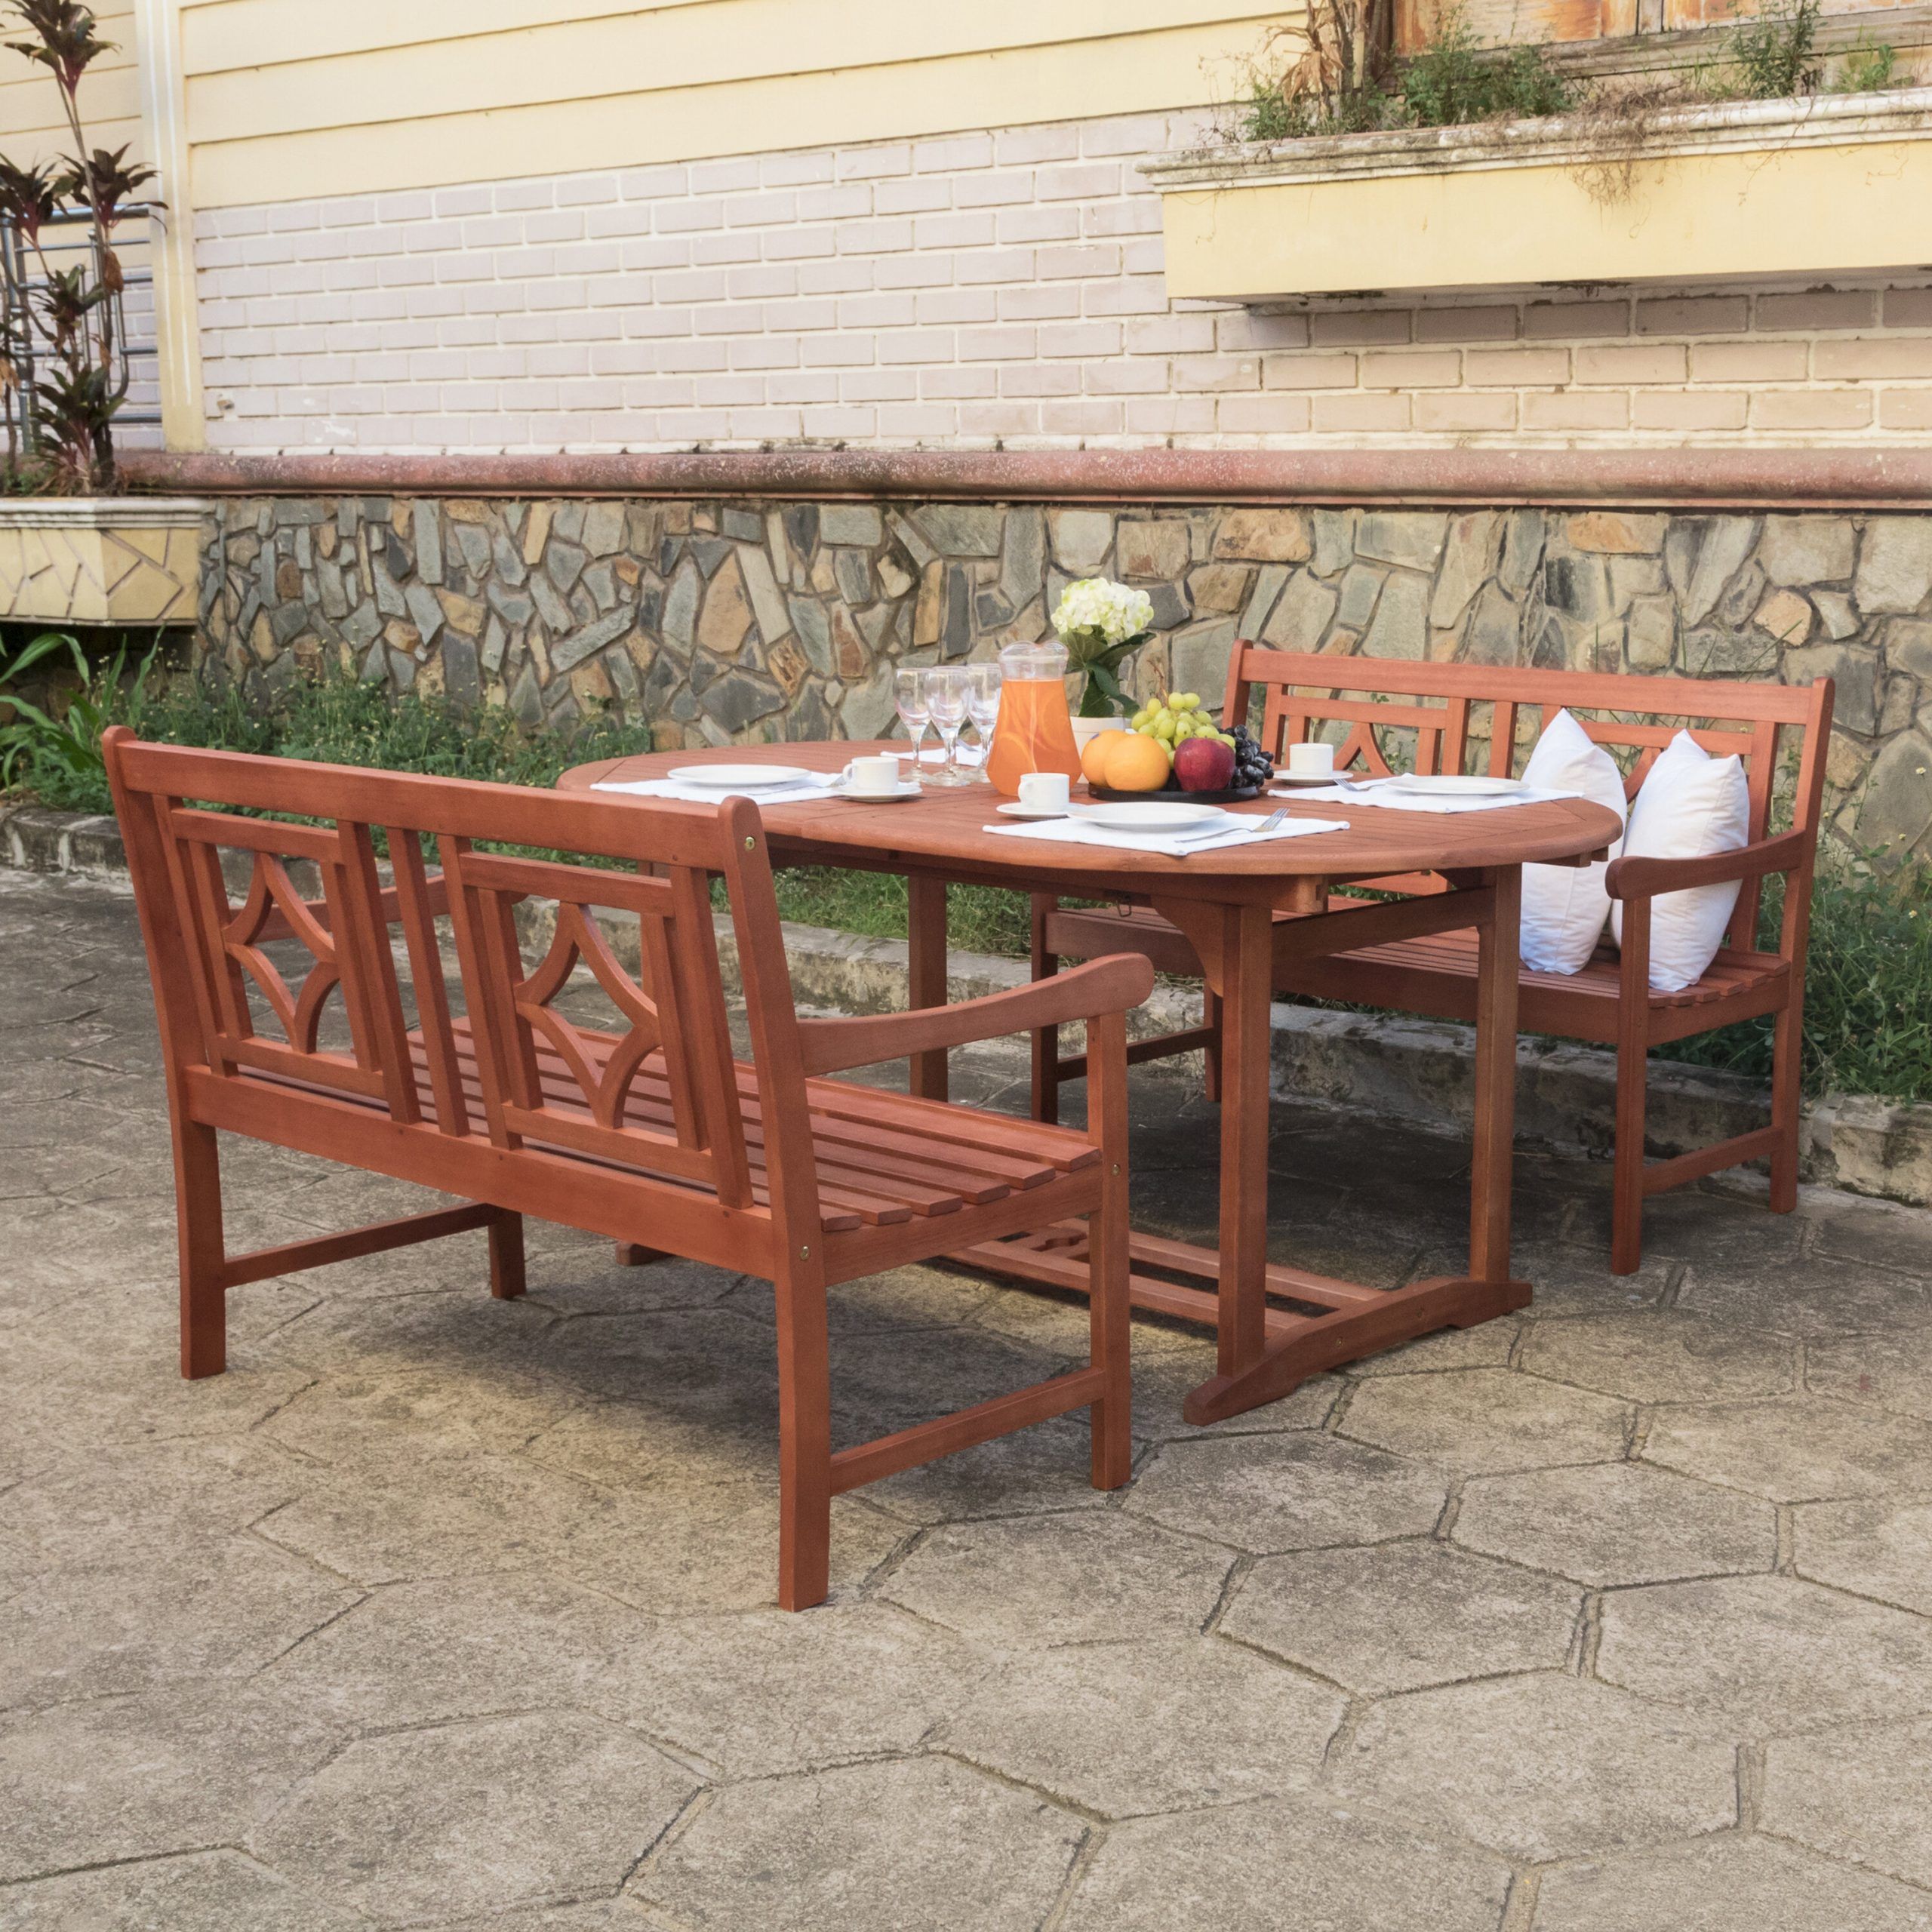 Amabel 3 Piece Patio Dining Set With Regard To Amabel Patio Diamond Wooden Garden Benches (View 10 of 25)